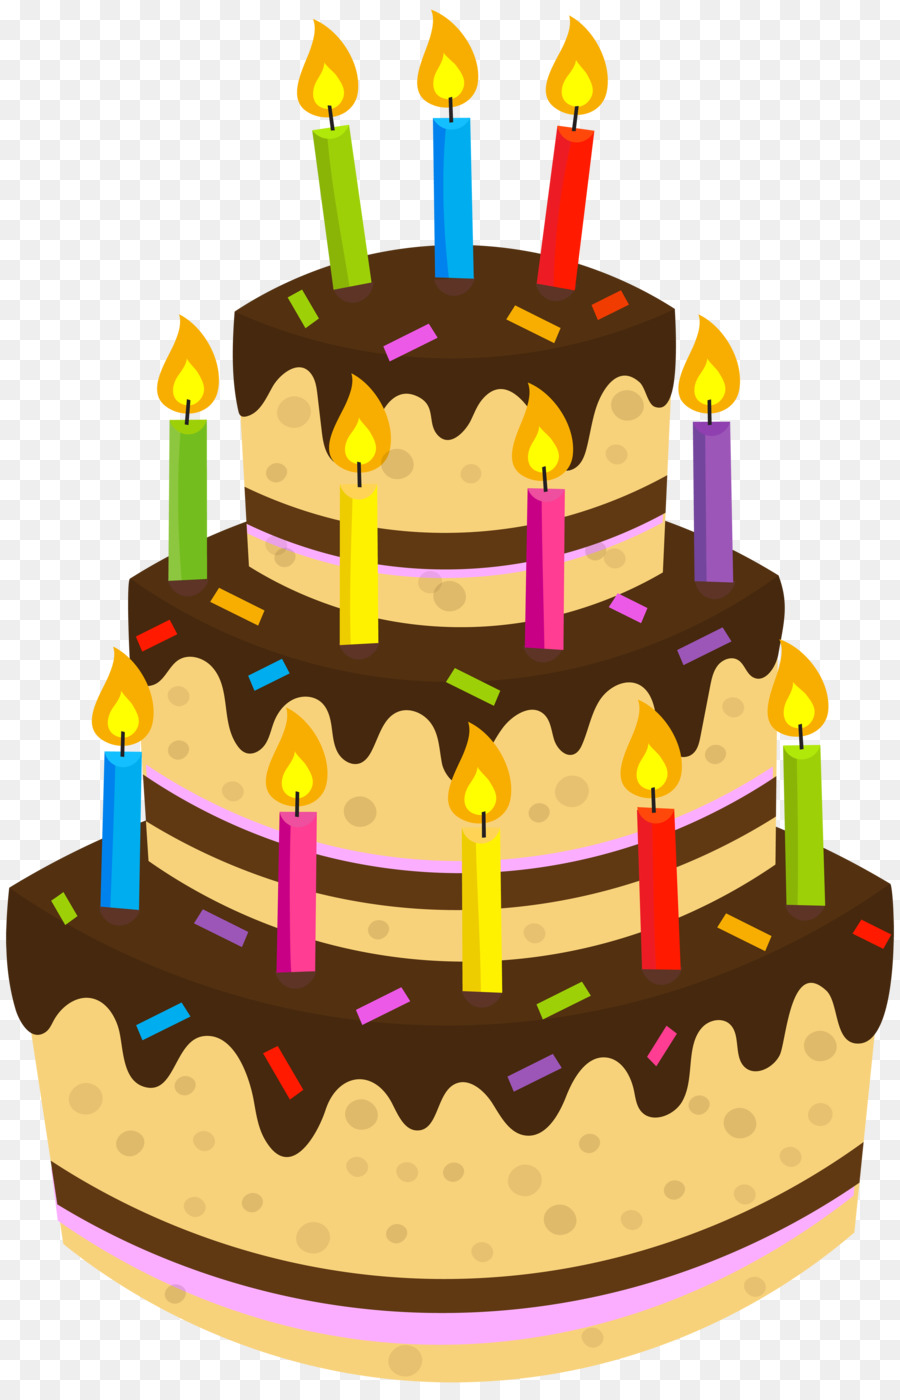 Birthday cake Drawing Clip art - birthday cake png download - 5172*8000 - Free Transparent Birthday Cake png Download.